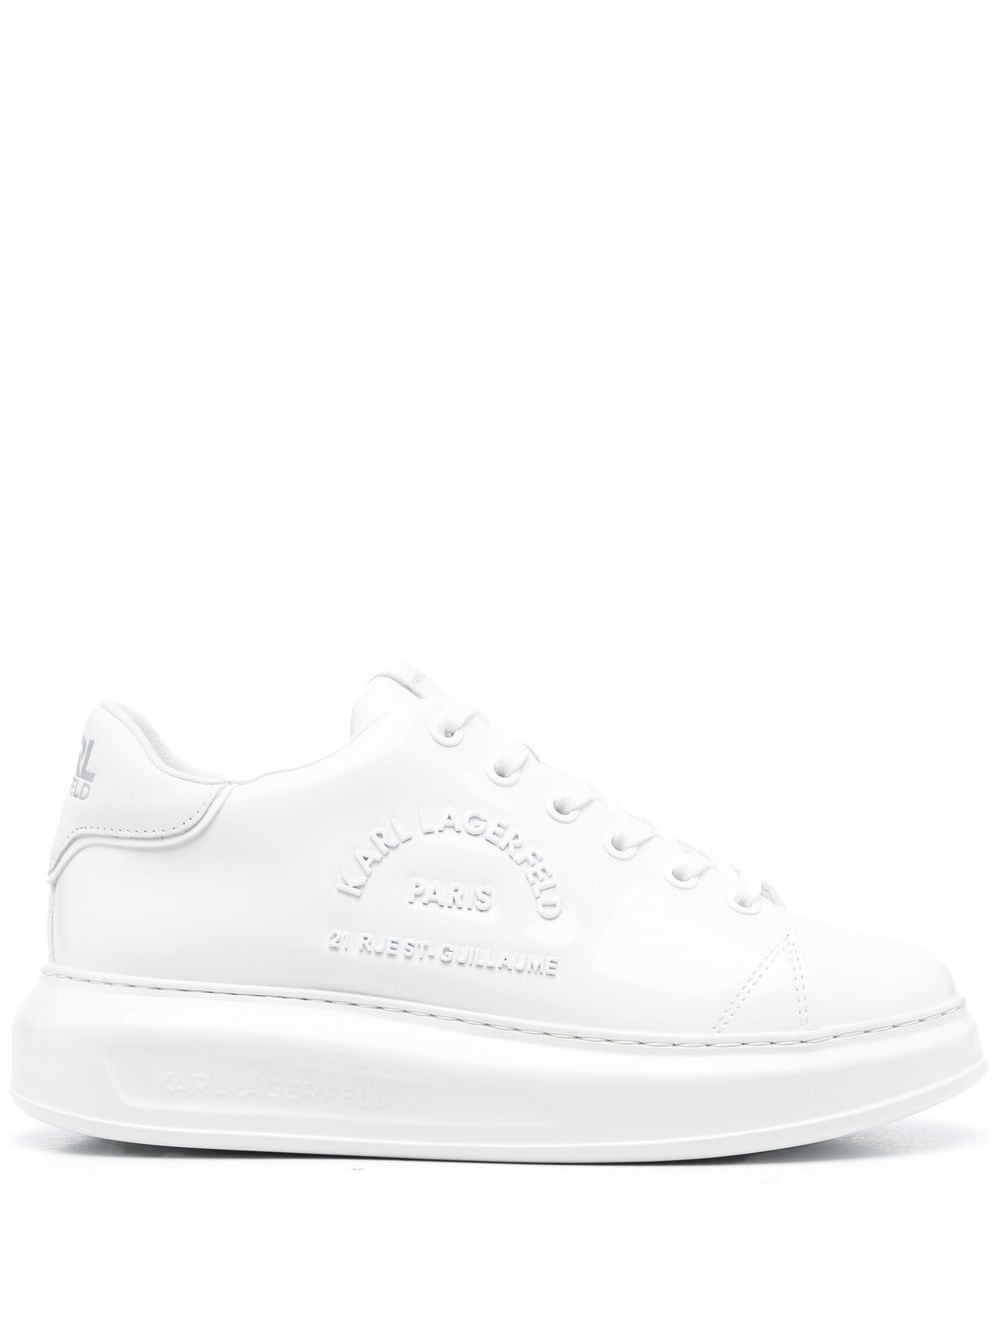 Karl Lagerfeld Rue St Guillaume Low-top Leather Sneakers In White